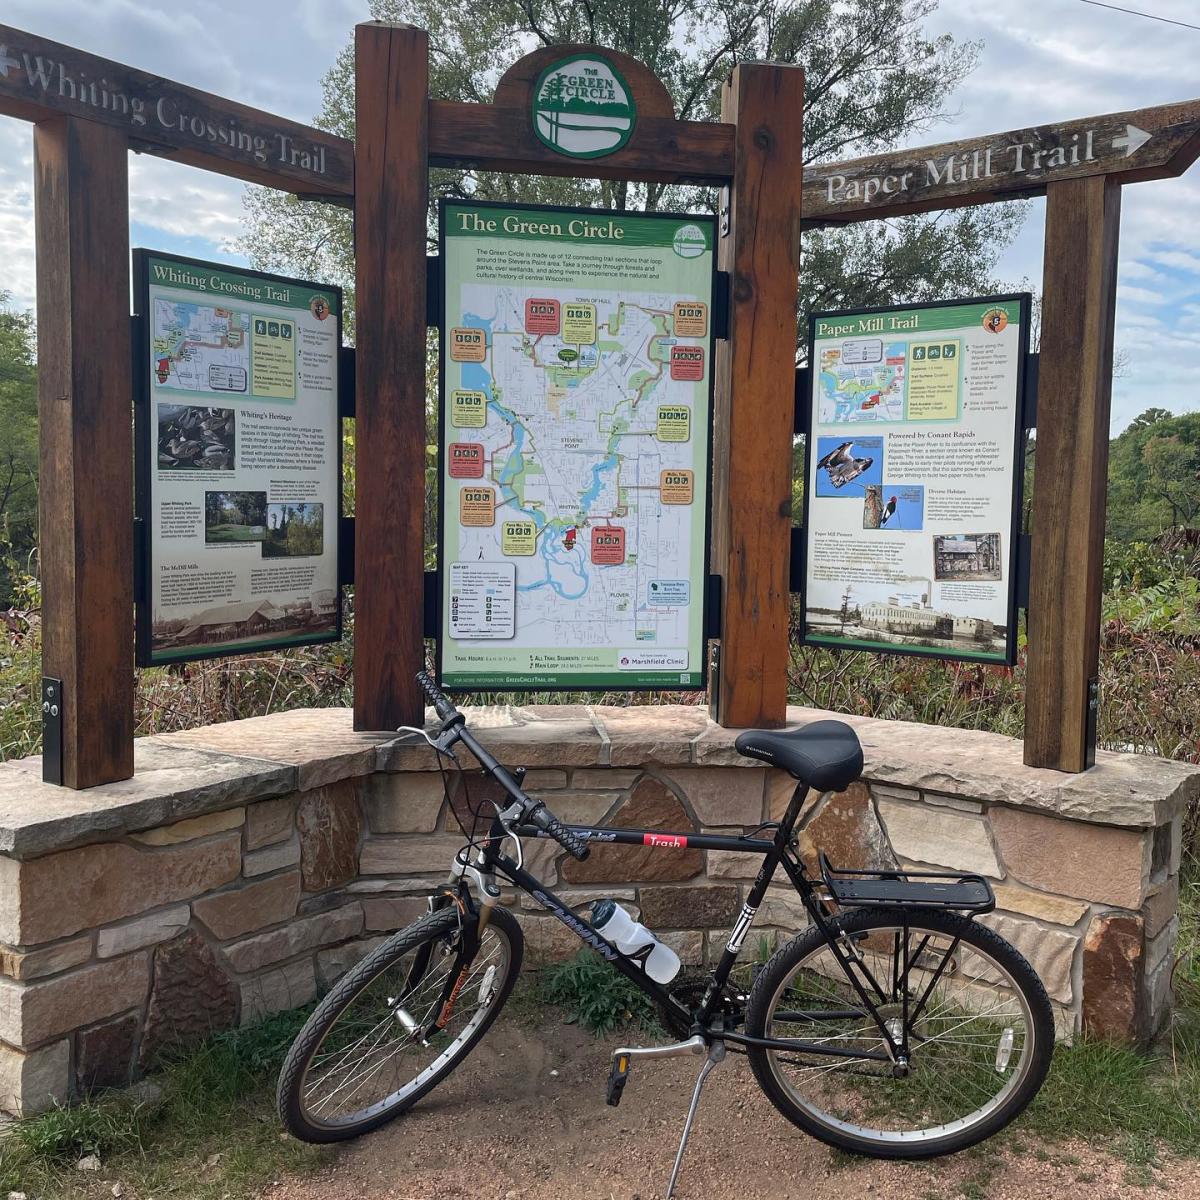 Bike in front of the Green Circle Trail Map